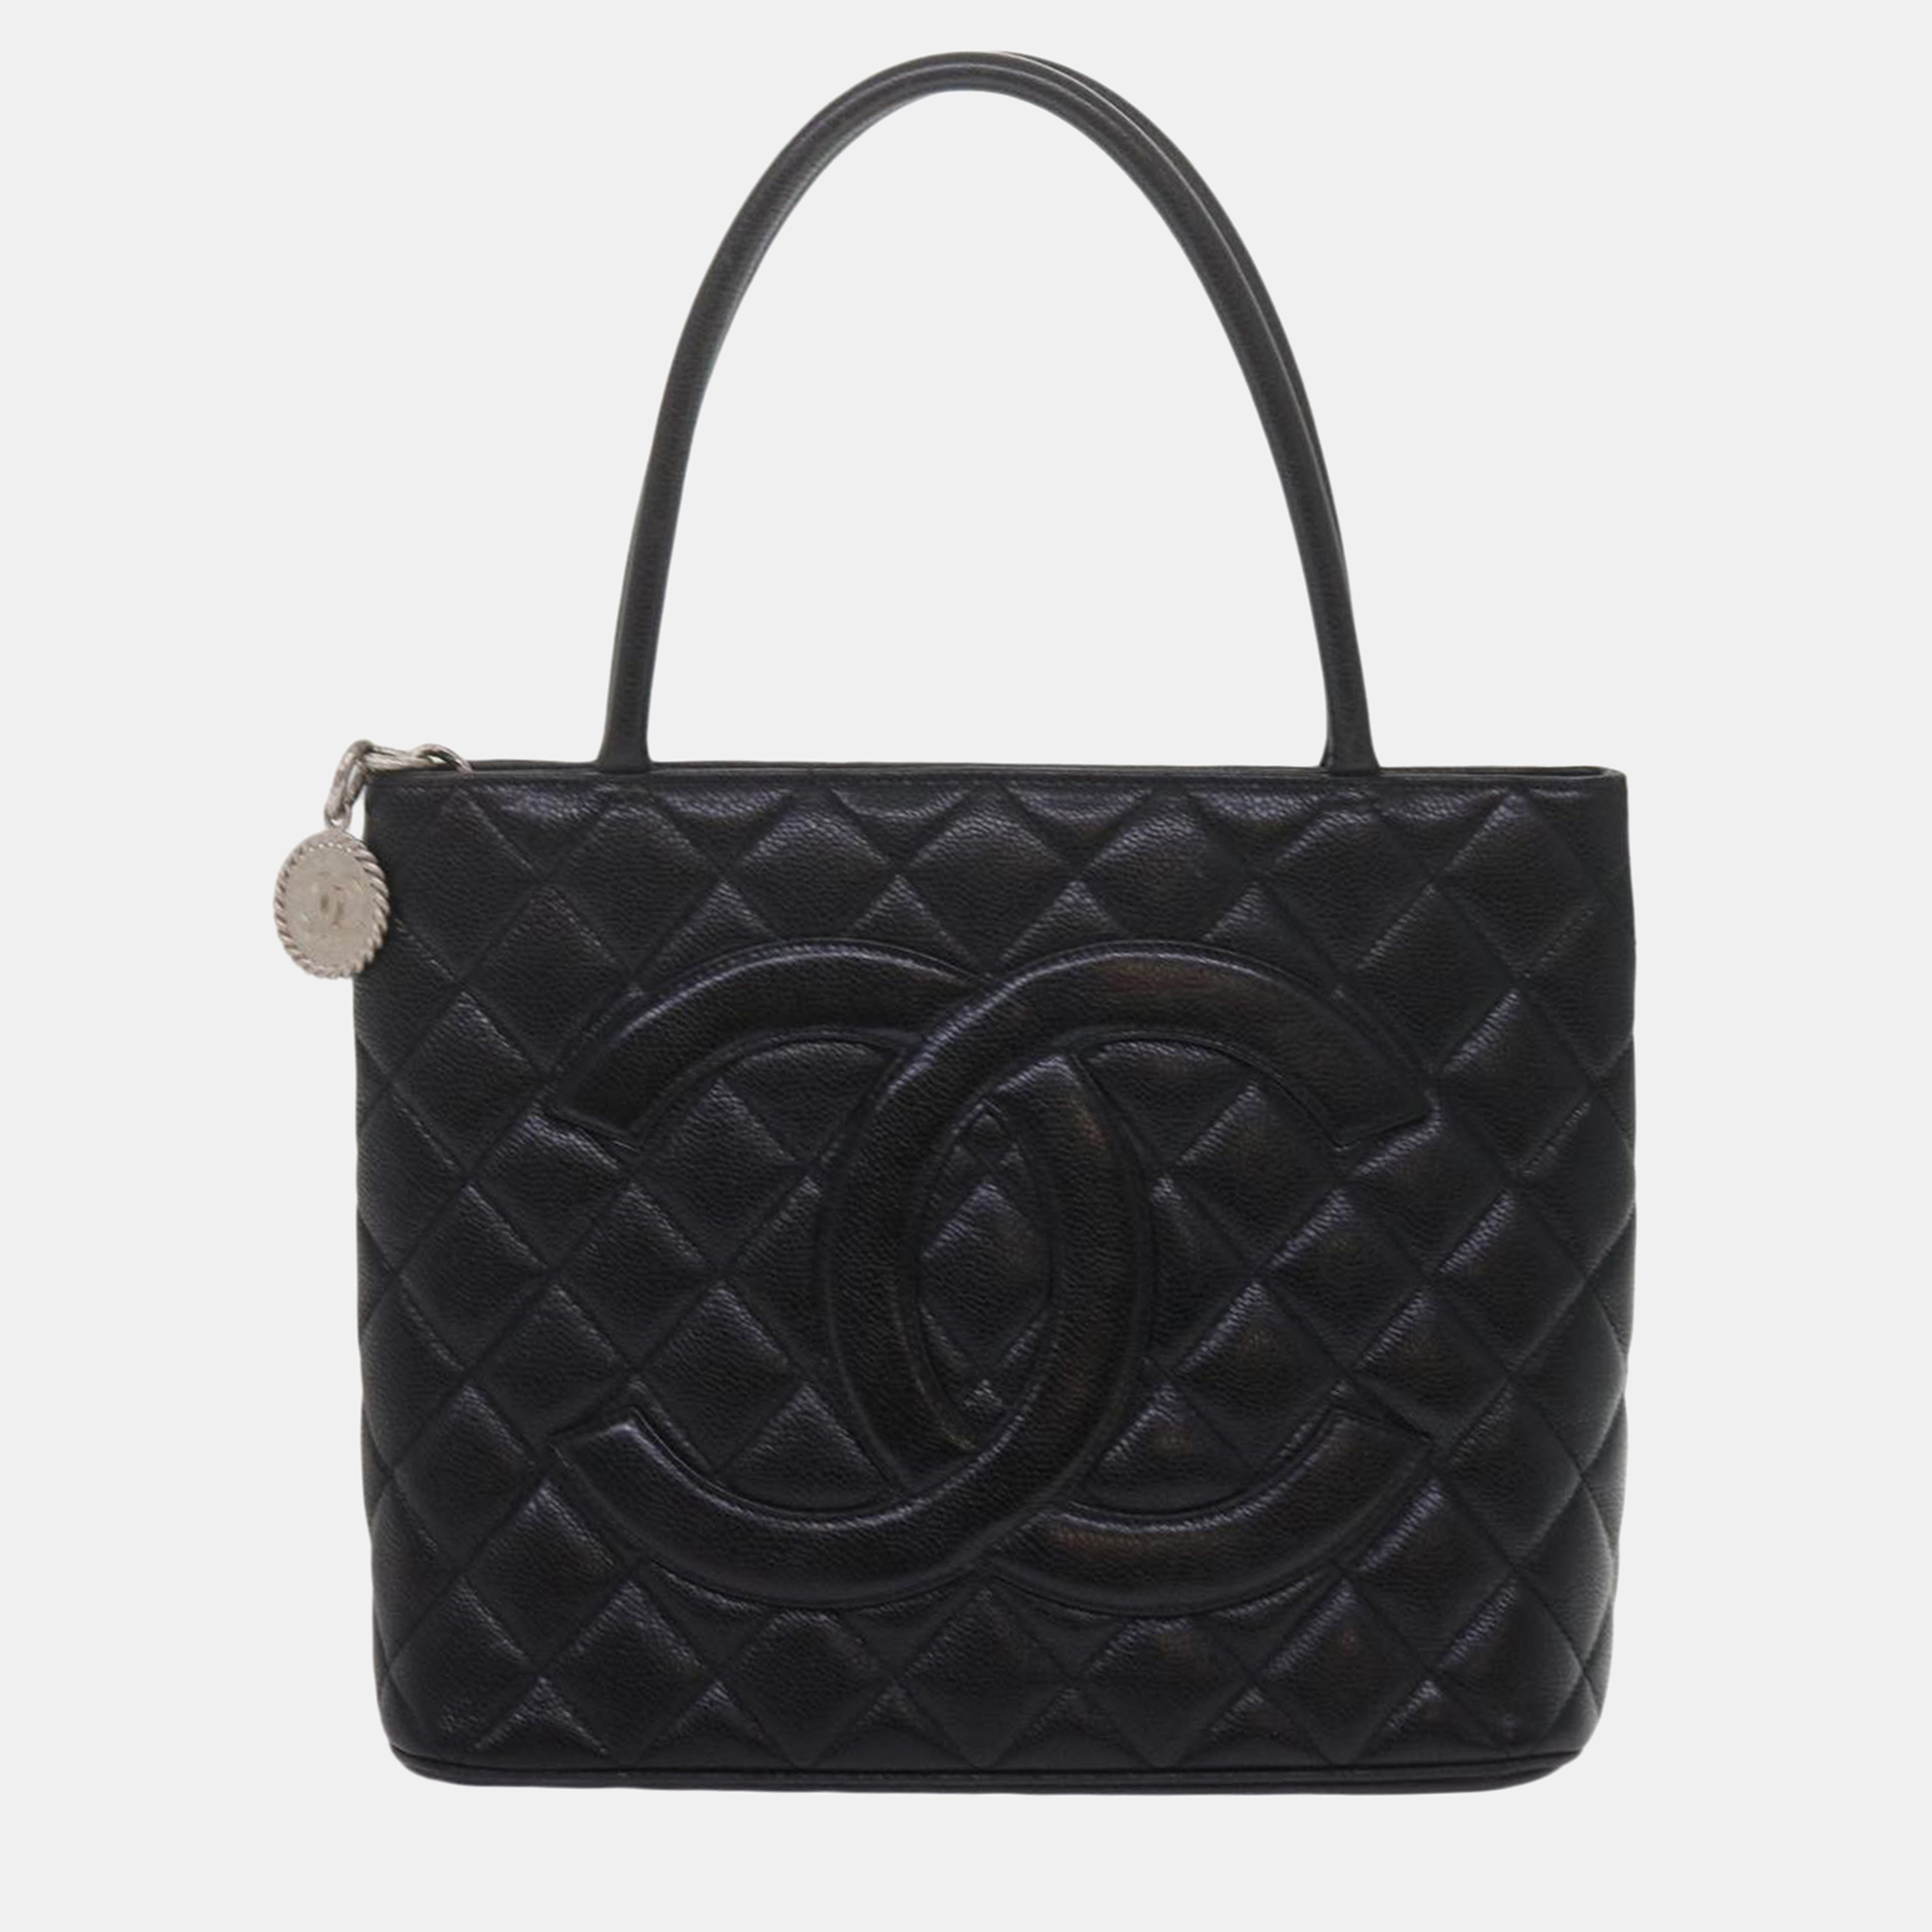 Chanel black leather  quilted madellion tote bag